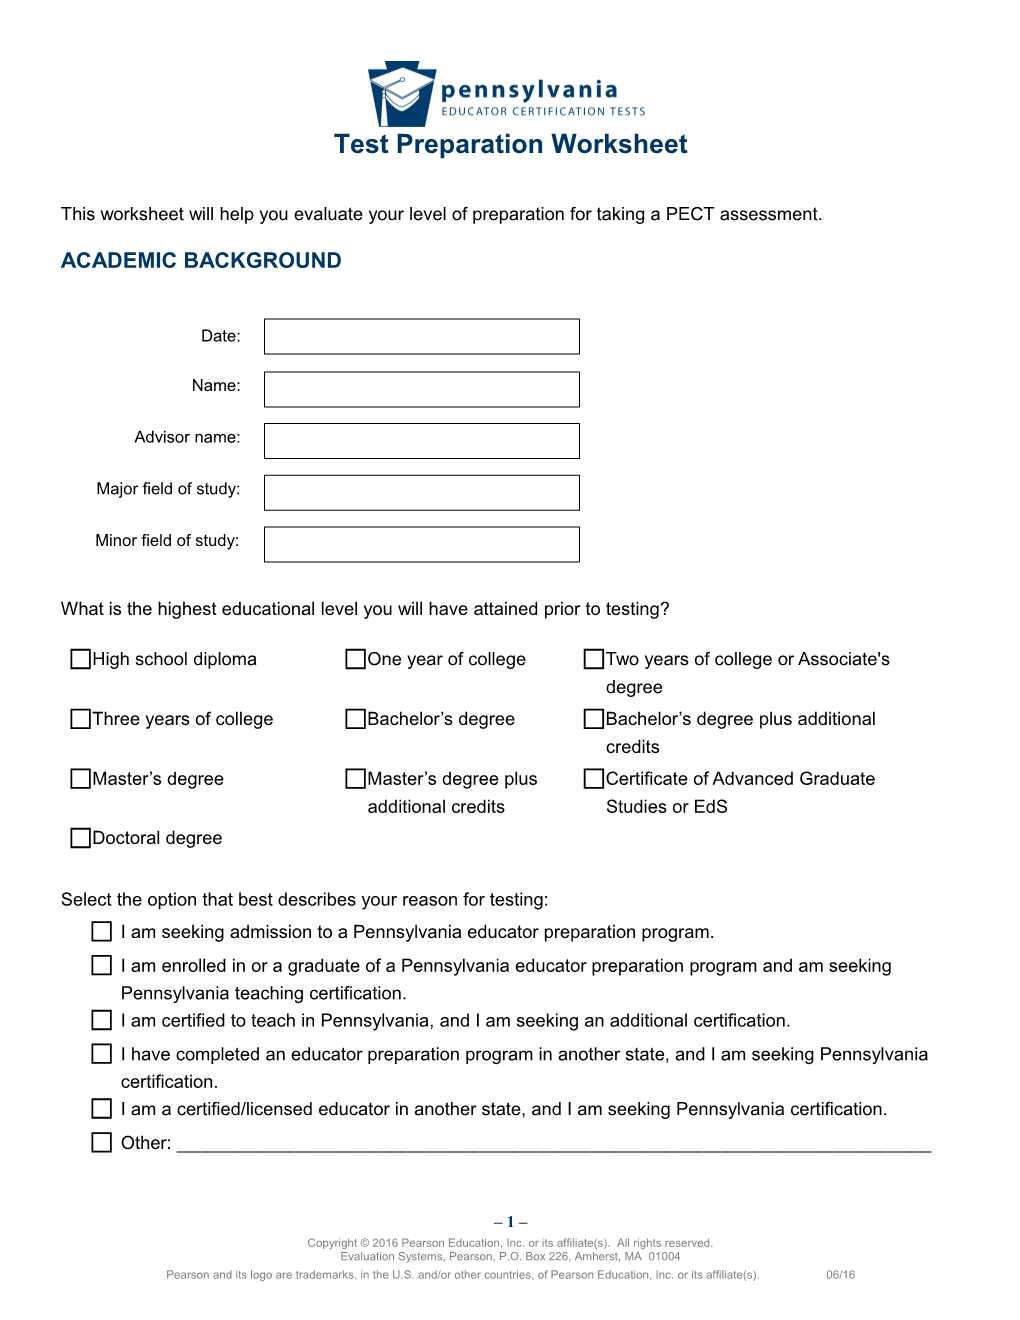 This Worksheet Will Help You Evaluate Your Level of Preparation for Taking a PECT Assessment